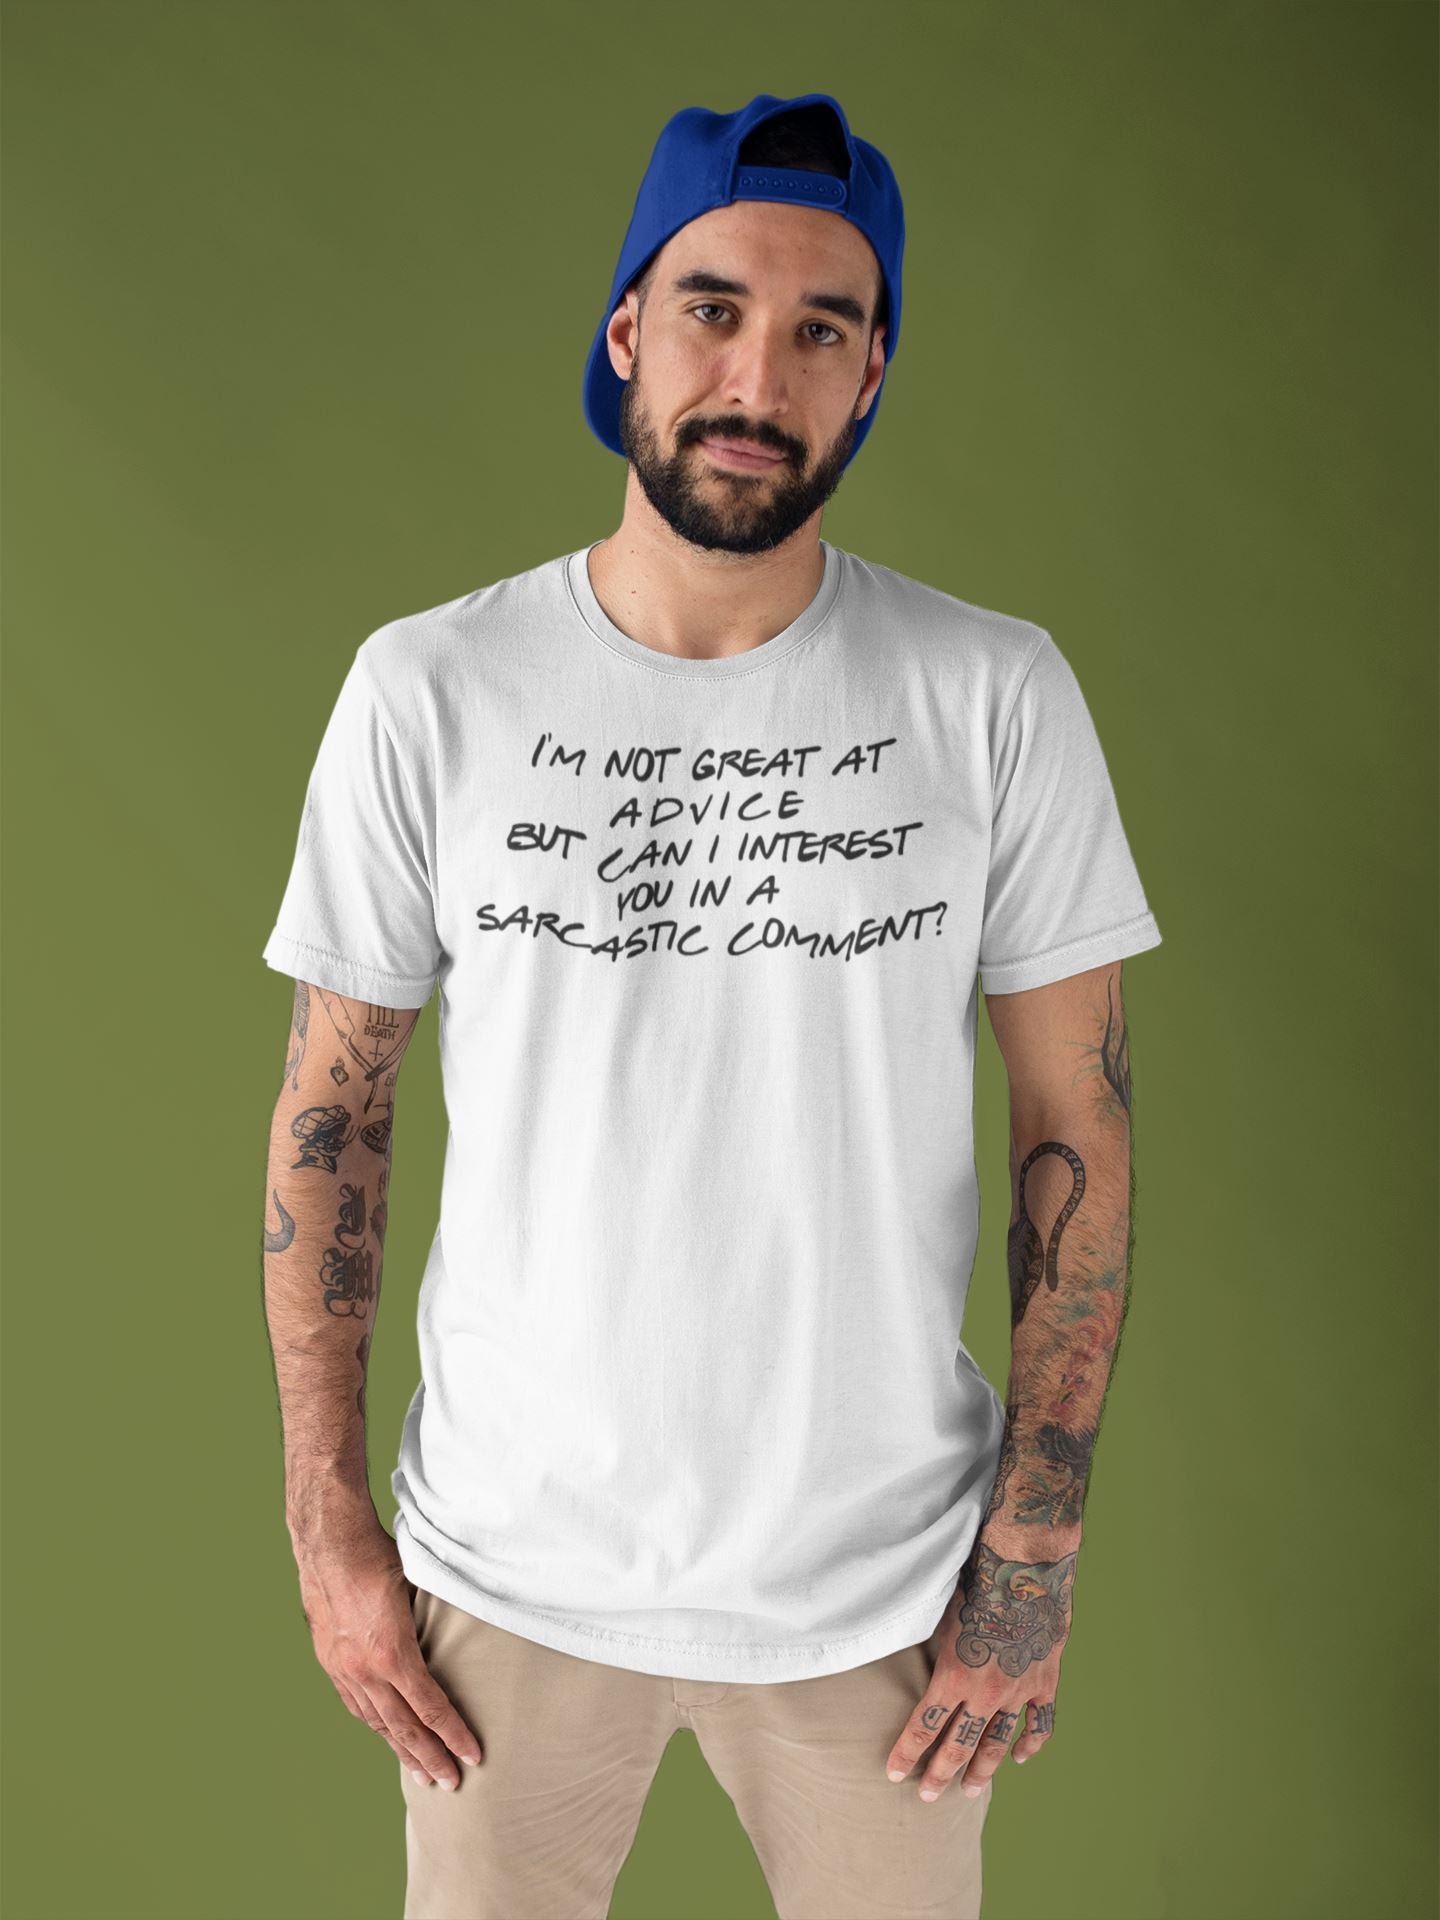 Can I Interest You in a Sarcastic Comment Special Chandler Bing T Shirt for Men and Women freeshipping - Catch My Drift India